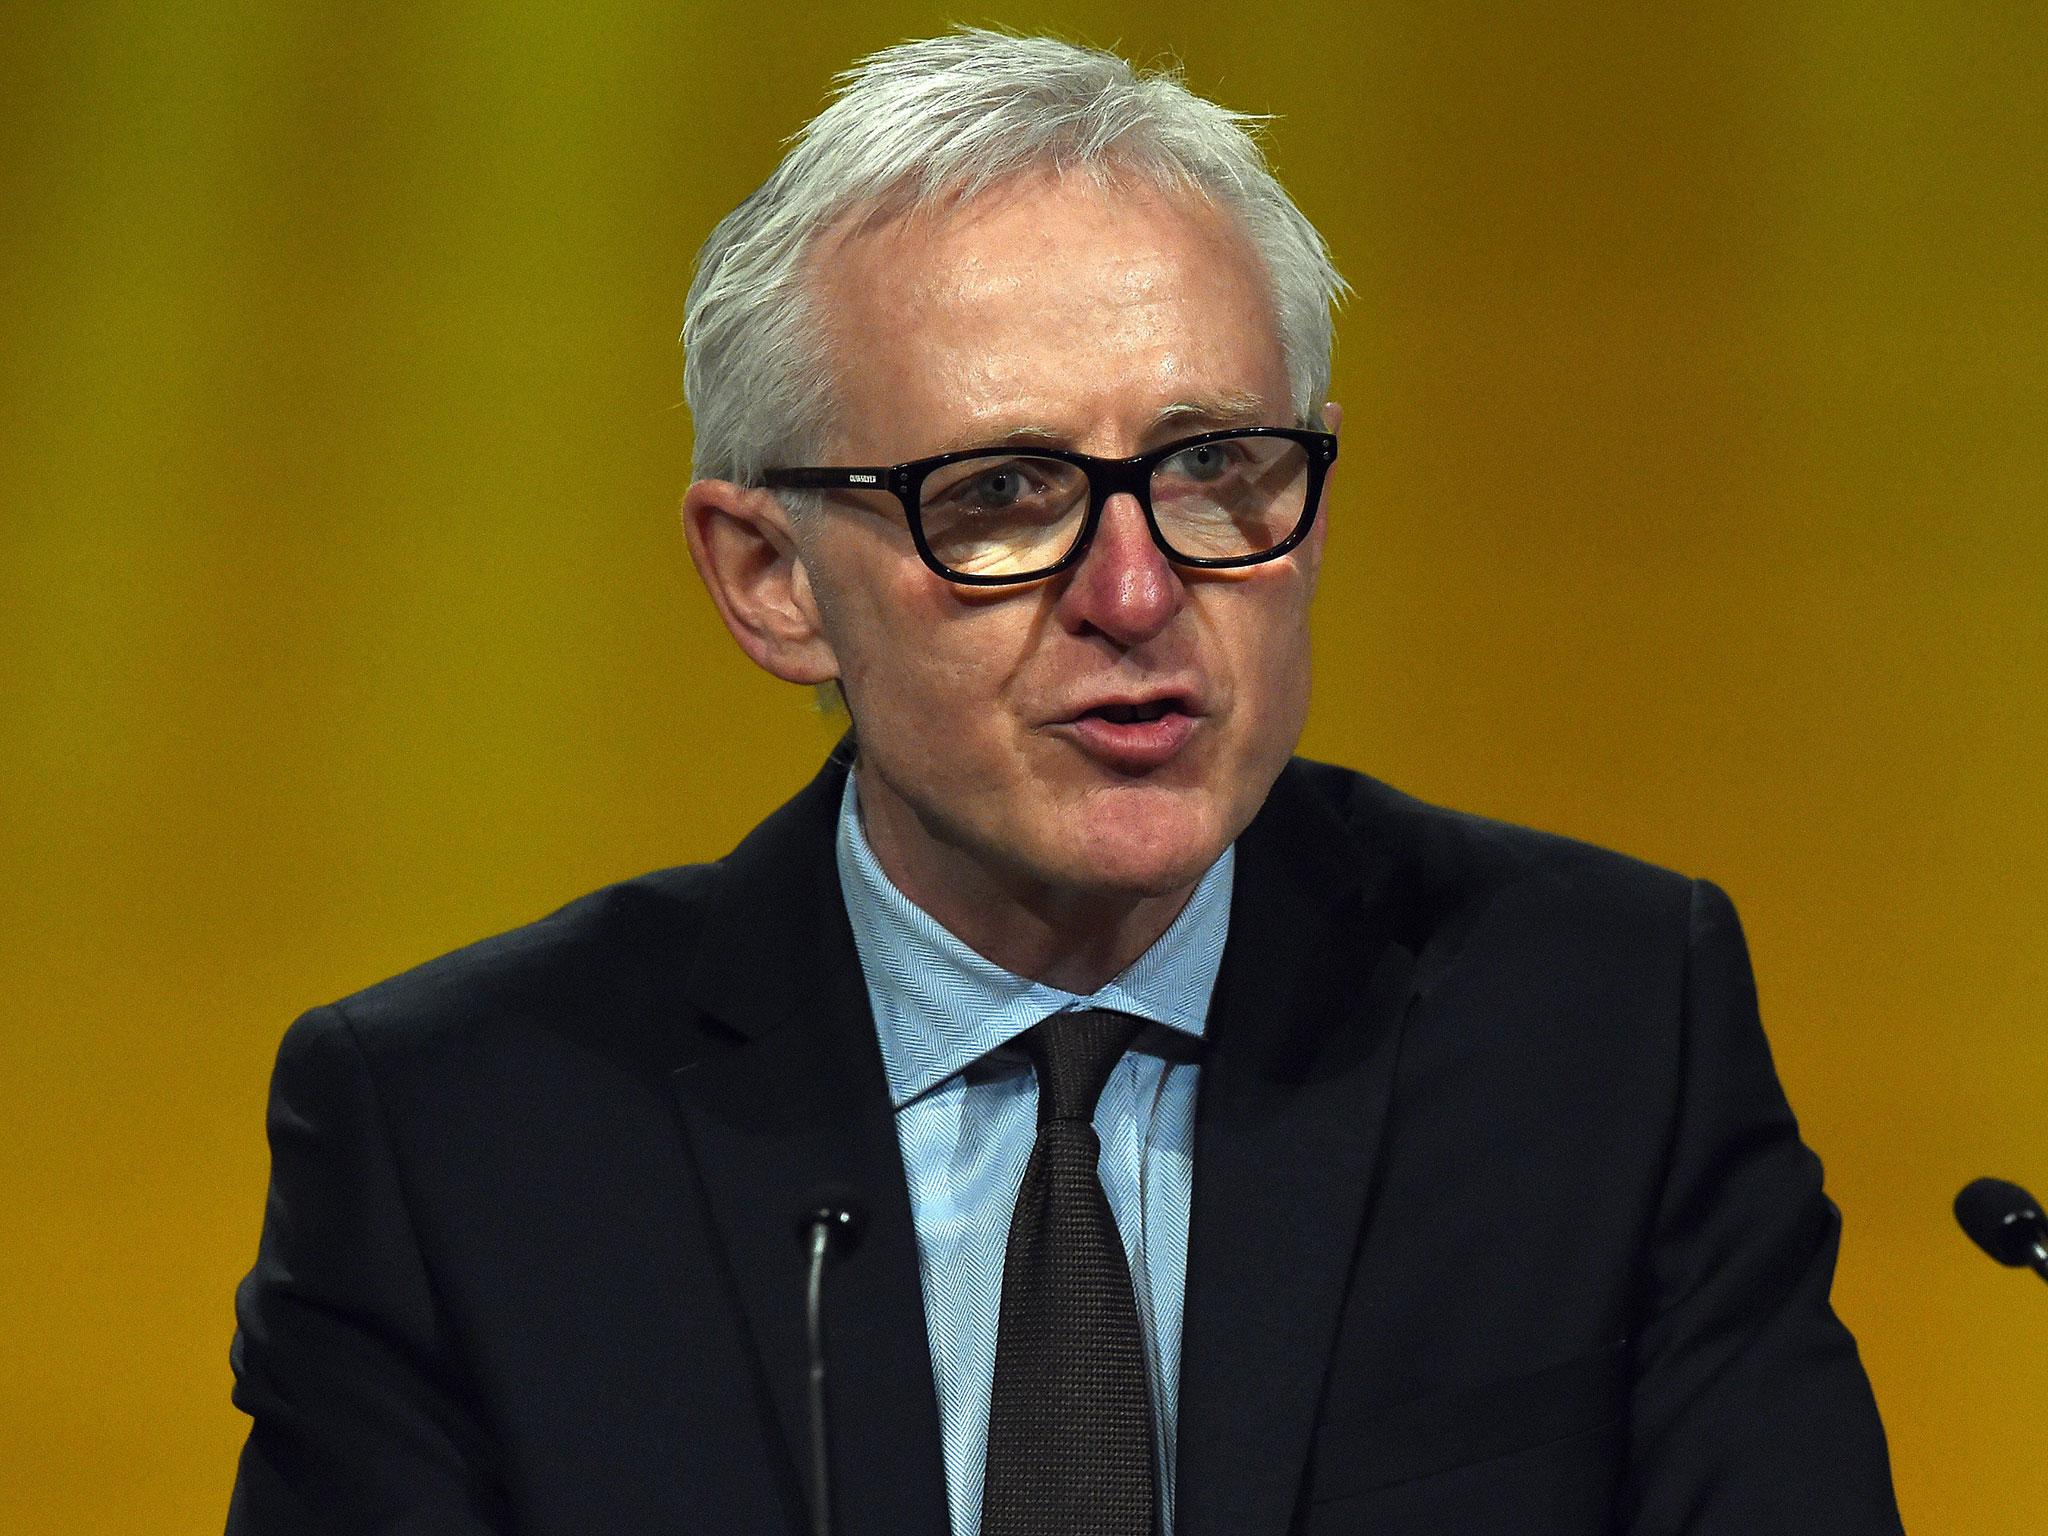 Norman Lamb said mental health provision in Norfolk is 'scandalous' (Liberal Democrat MP Norman Lamb, minister for care and support, addressing the party's spring conference in Liverpool on 15 March 2015)